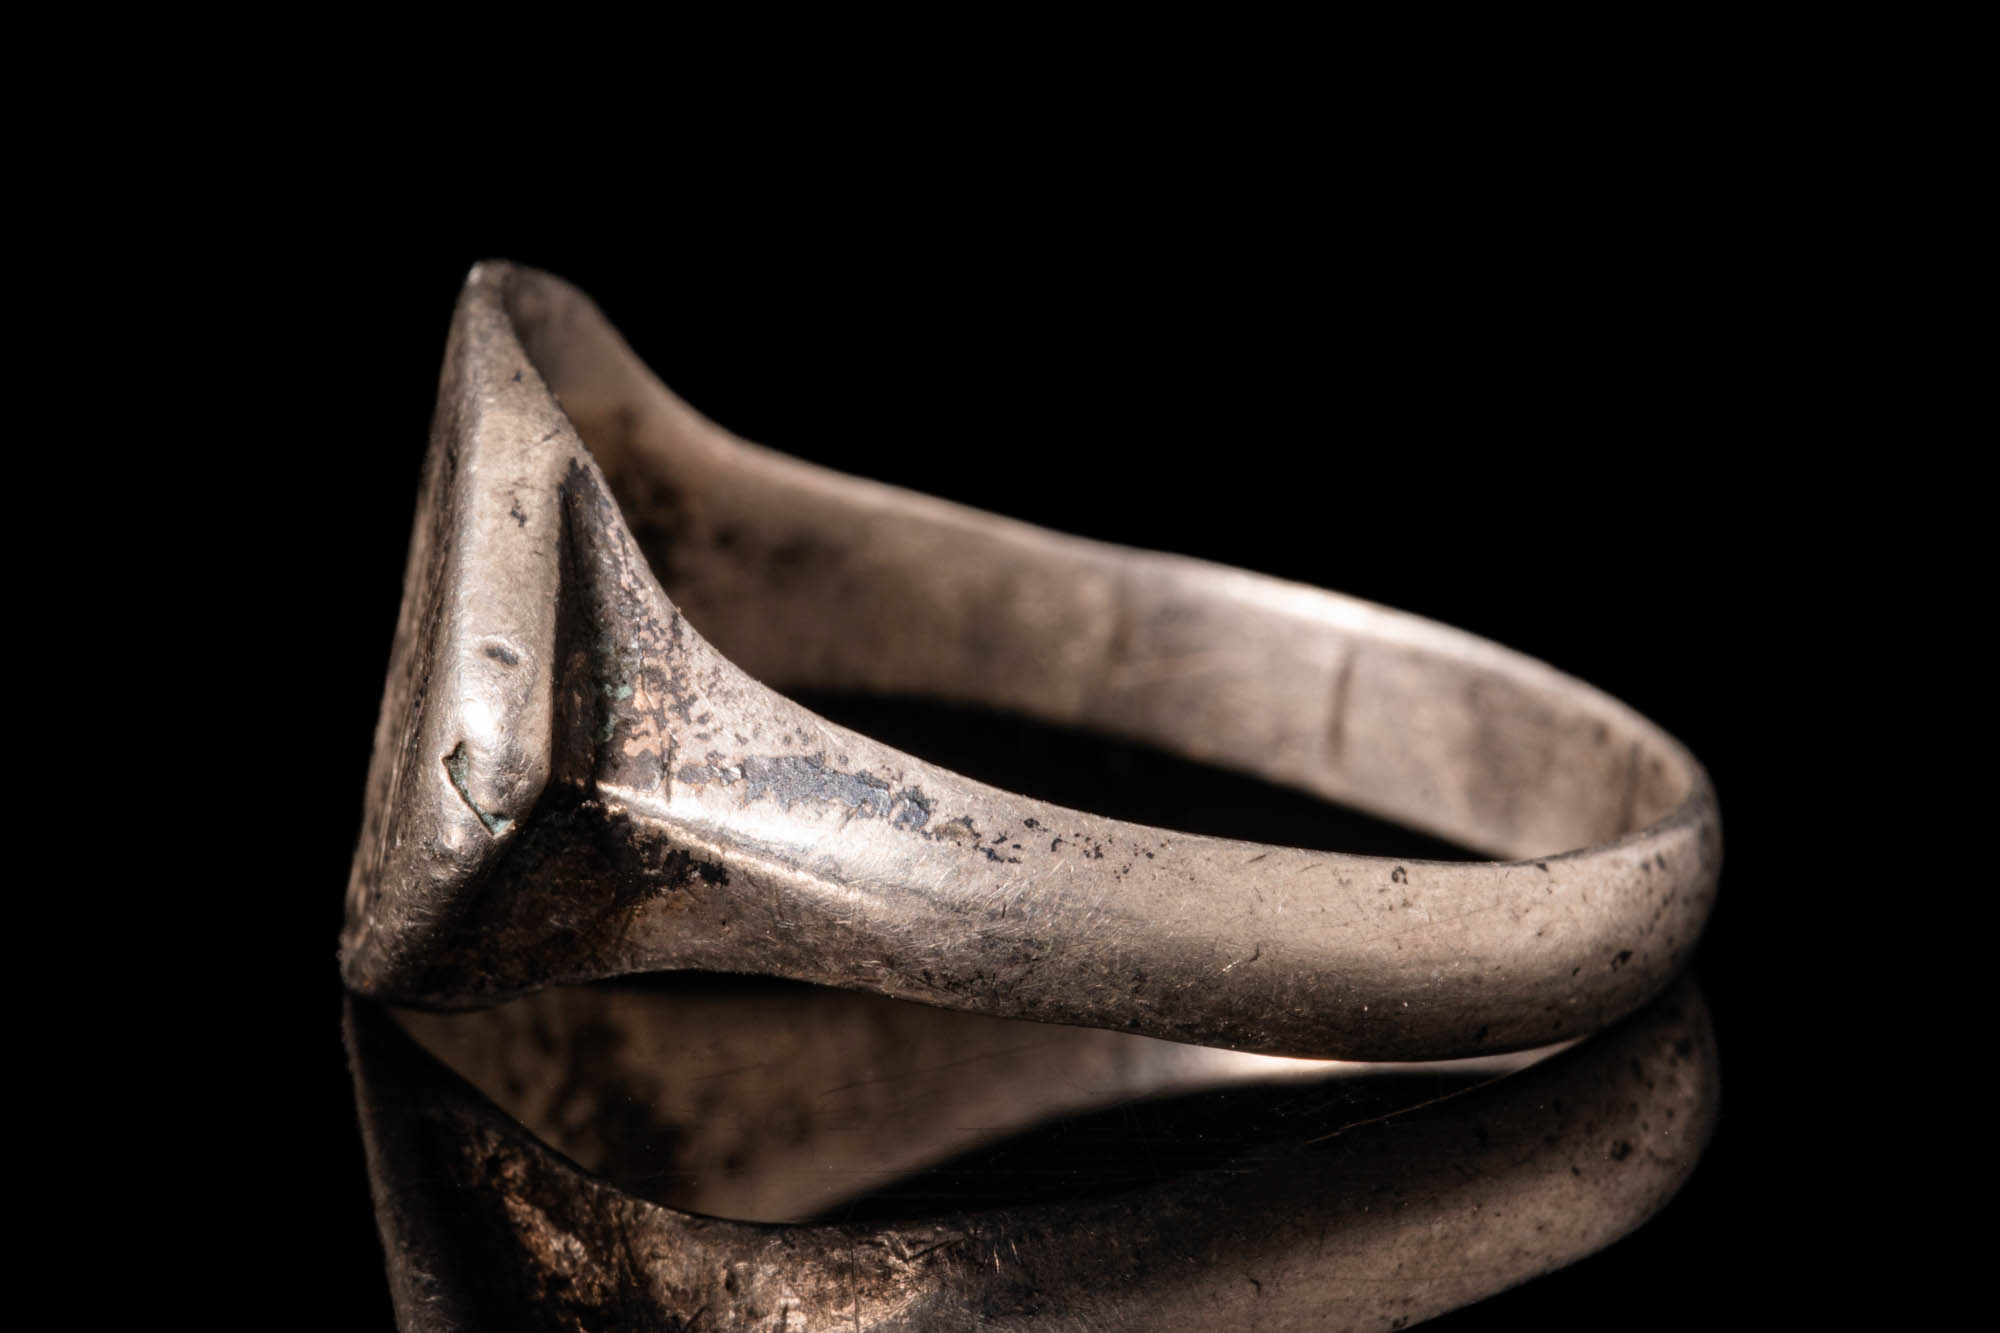 MEDIEVAL SELJUK SILVER RING WITH DECORATED BEZEL - Image 3 of 4